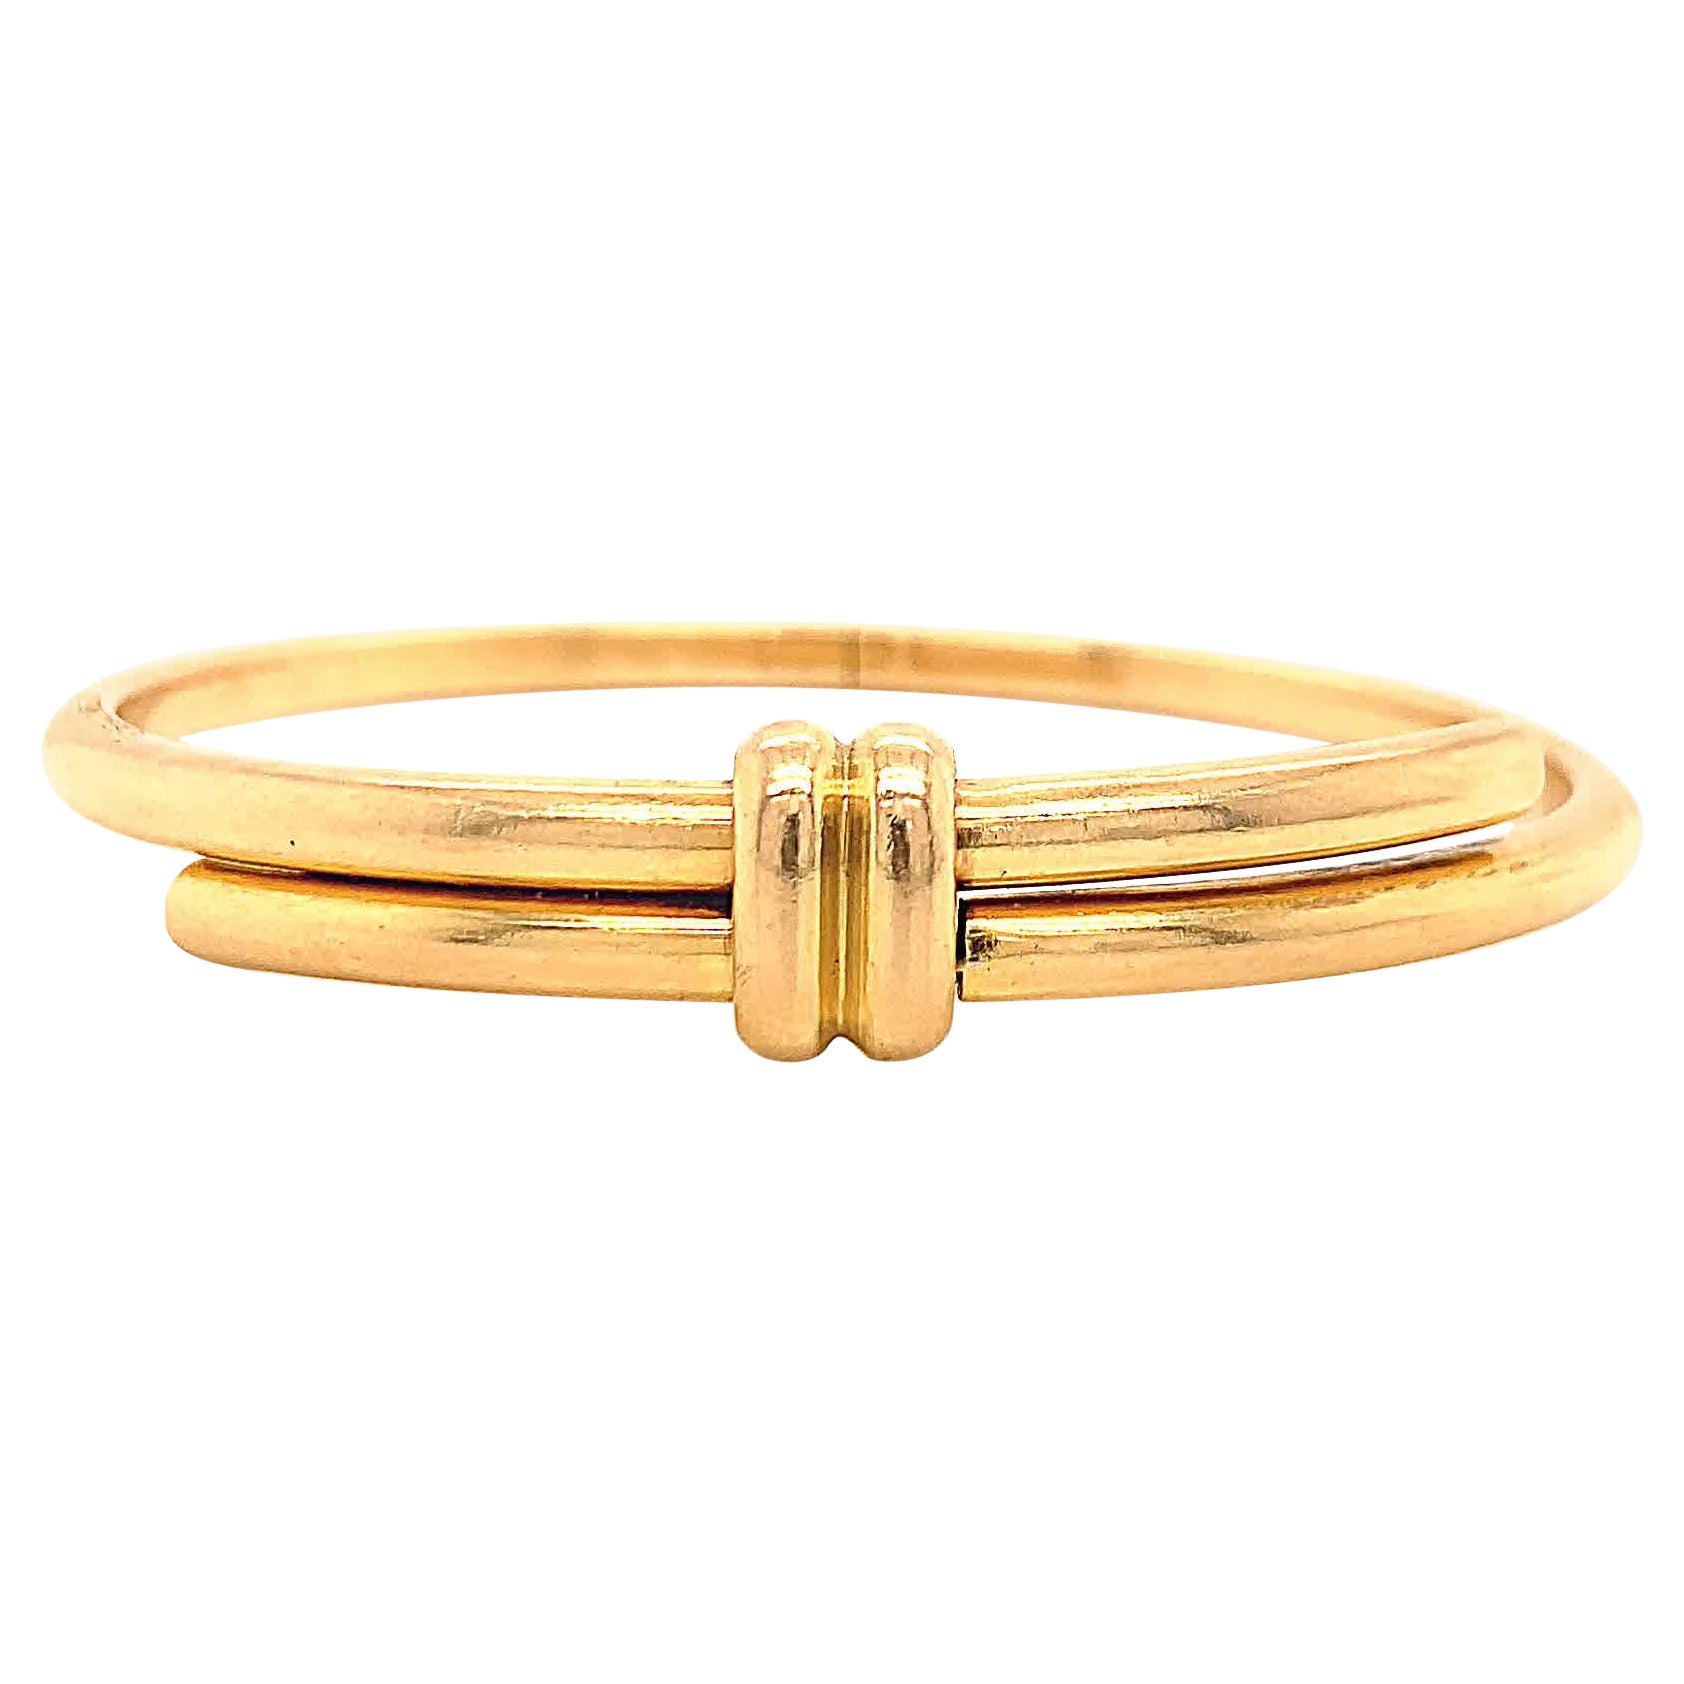 Vintage French Chaumet 18K Gold Bangle